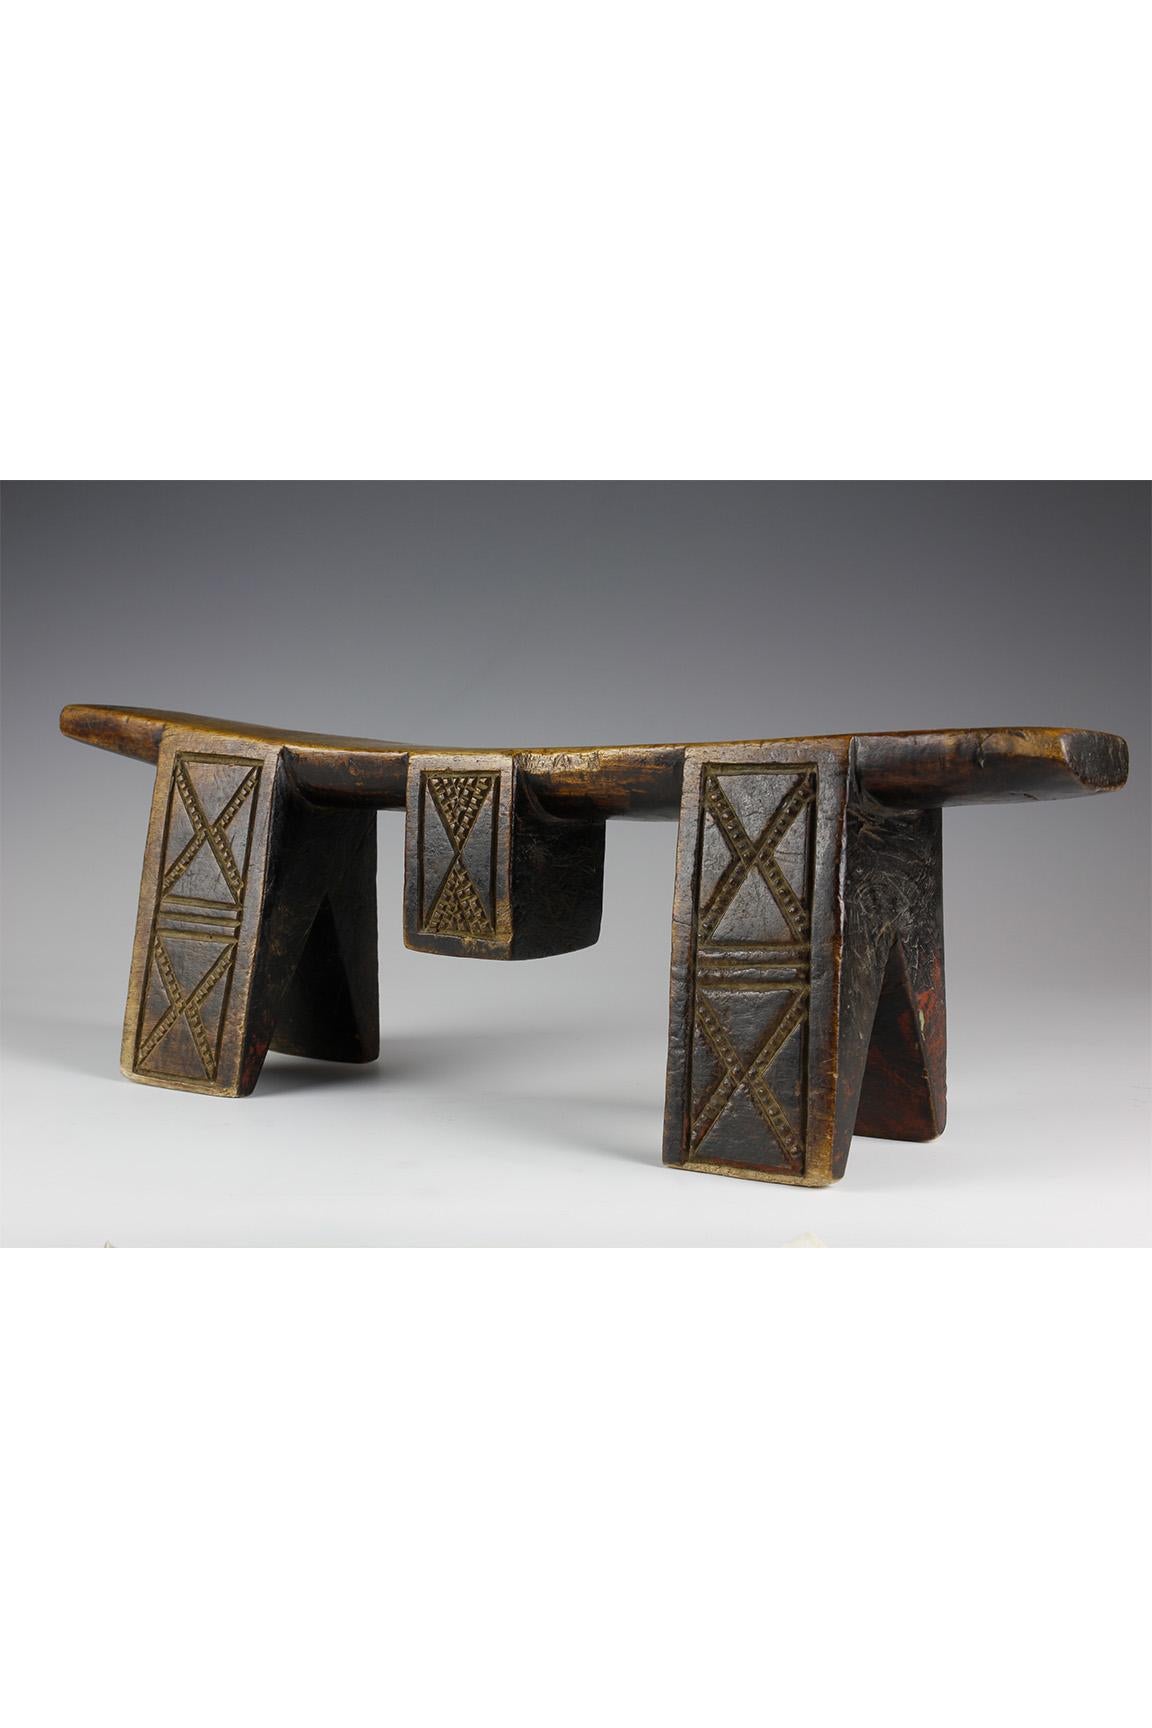 This fine early twentieth-century headrest, from the Zulu culture in South Africa, was previously part of a selection of exceptional Southern African art in the Terence and Bernice Pethica Collection. The headrest has been beautifully carved,